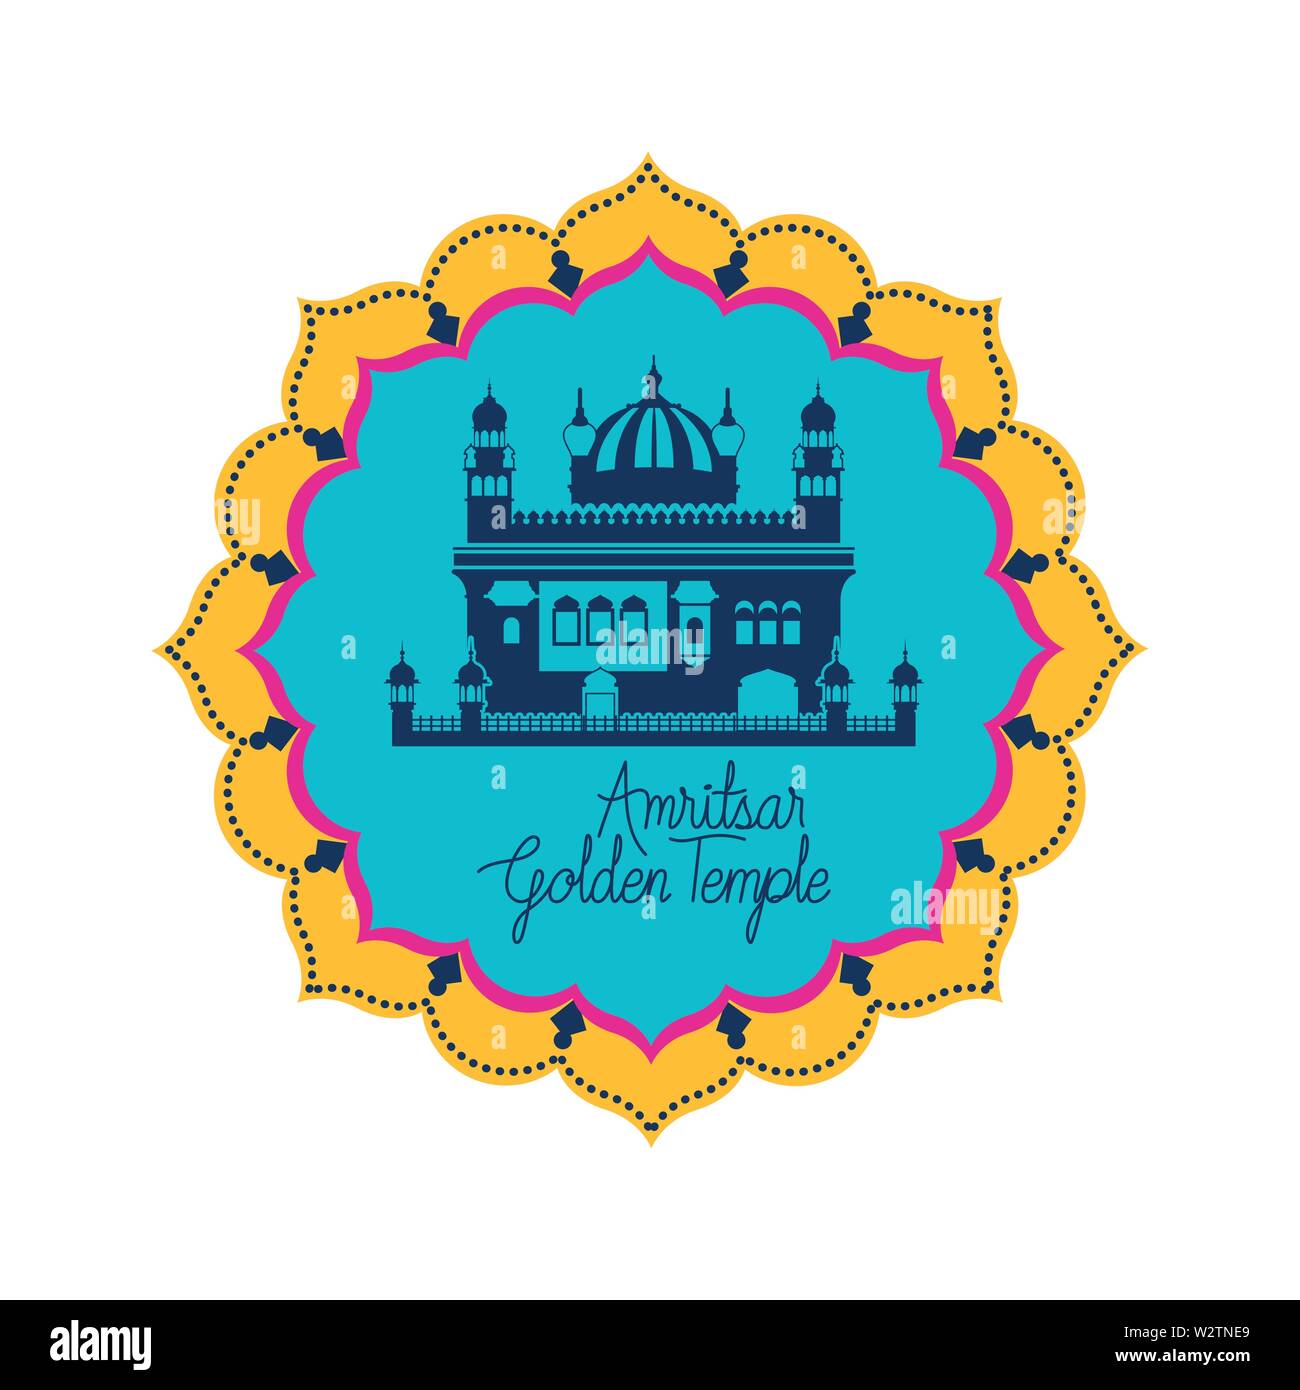 edification of amritsar golden temple and indian independence day Stock Vector